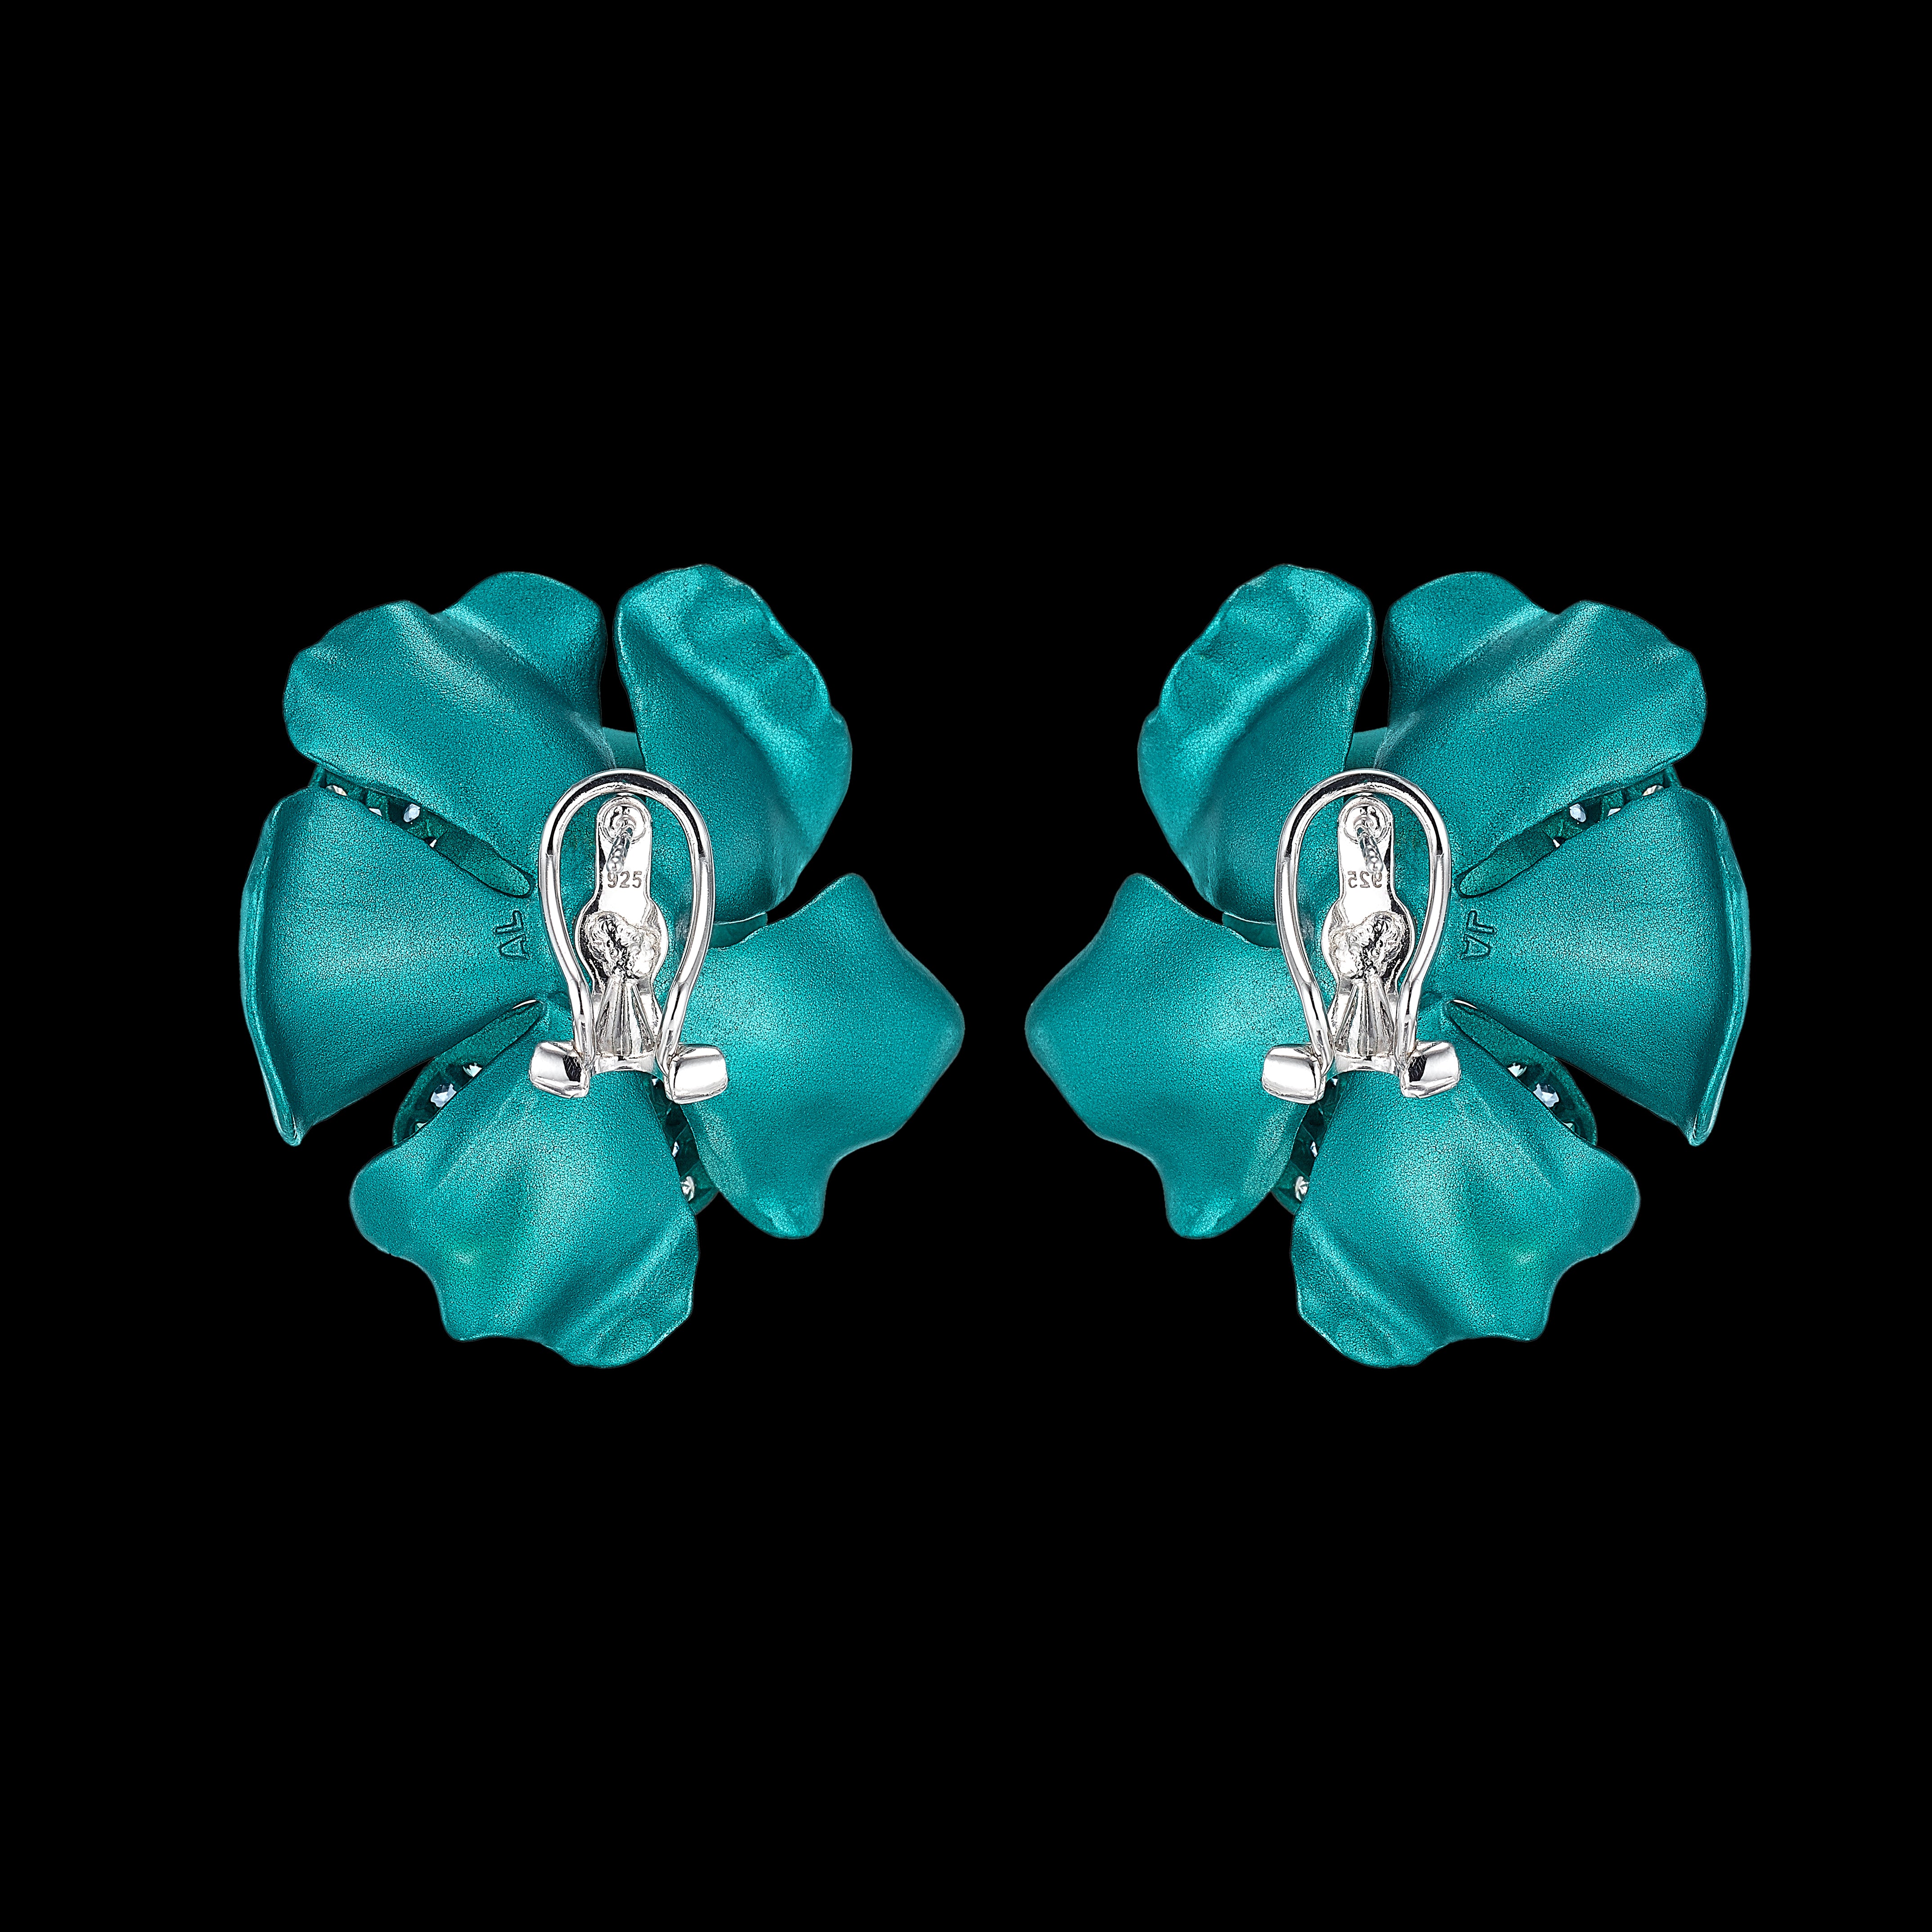 Aqua Camelia Earrings , Earrings, Anabela Chan Joaillerie - Fine jewelry with laboratory grown and created gemstones hand-crafted in the United Kingdom. Anabela Chan Joaillerie is the first fine jewellery brand in the world to champion laboratory-grown and created gemstones with high jewellery design, artisanal craftsmanship and a focus on ethical and sustainable innovations.